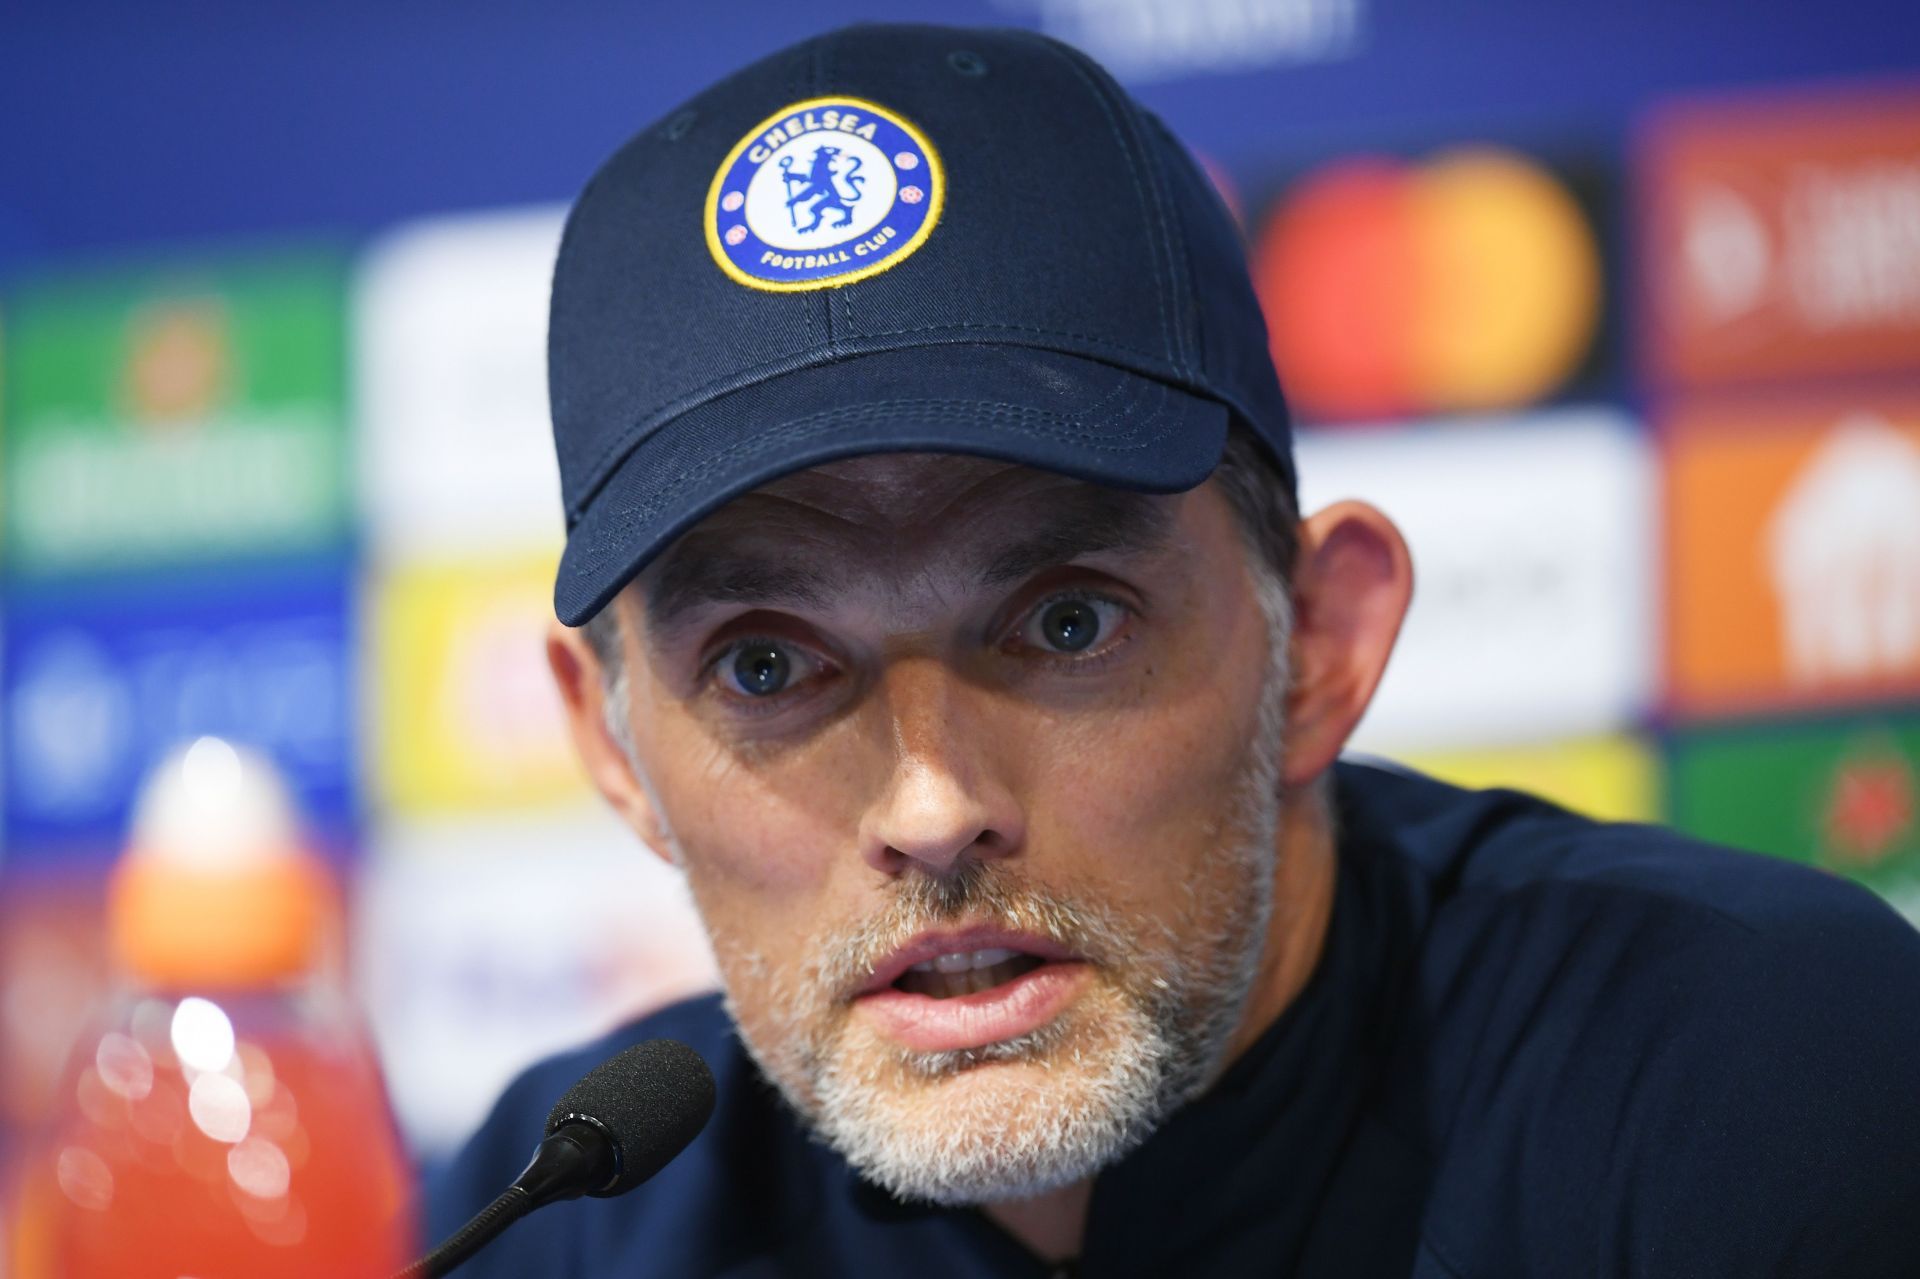 Tuchel spent 589 days as Chelsea manager